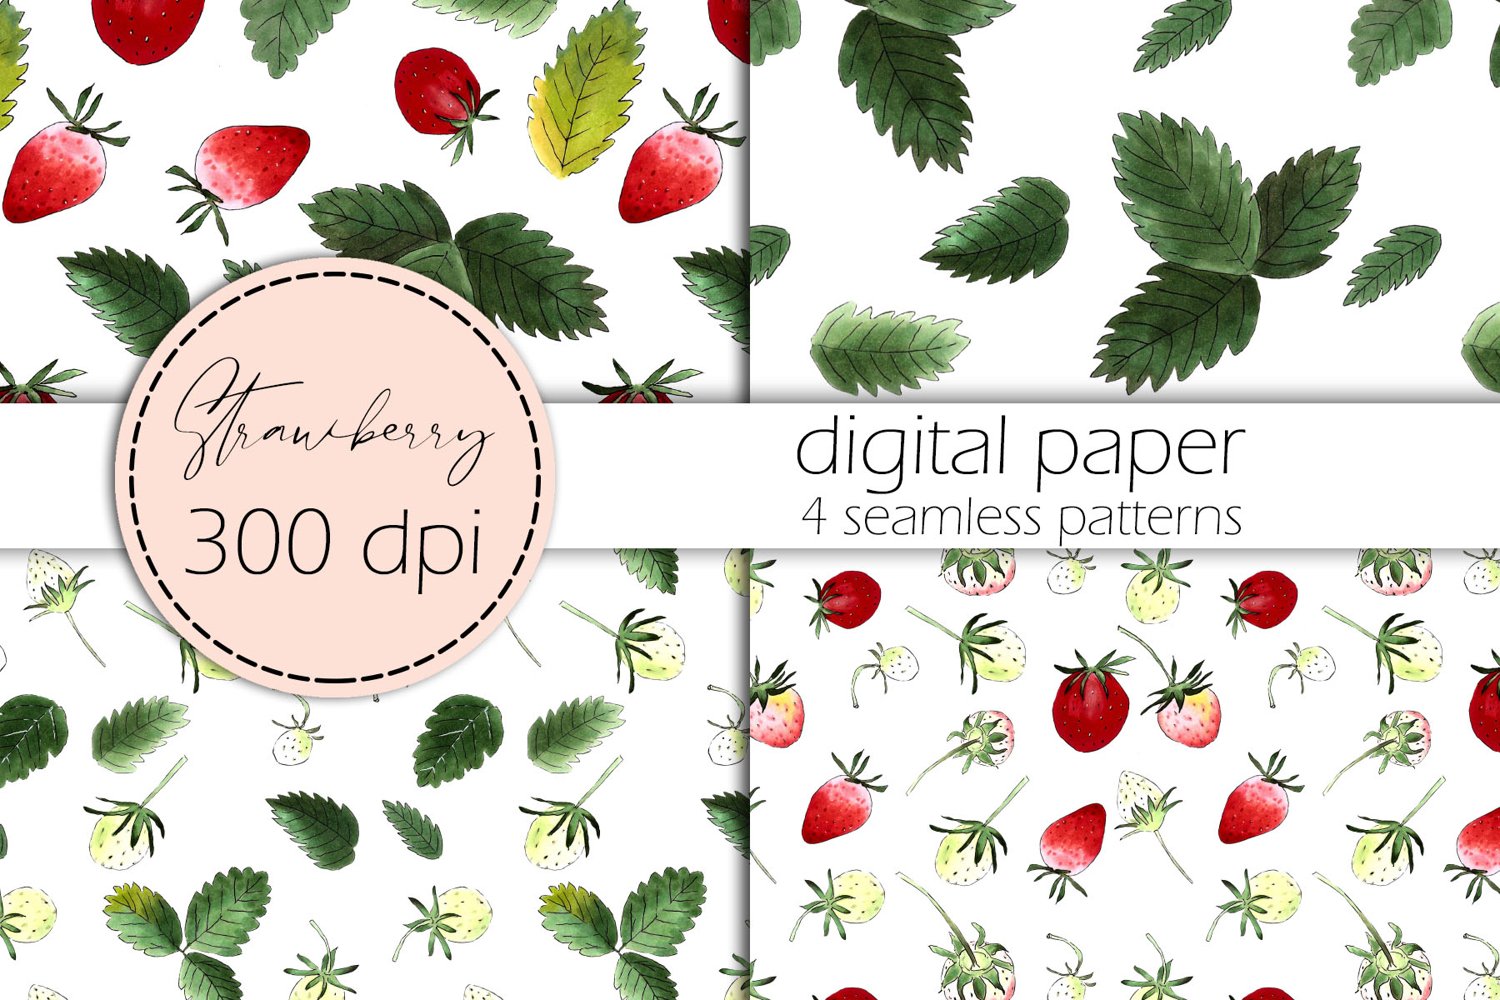 Cover image of Strawberry Digital Paper.